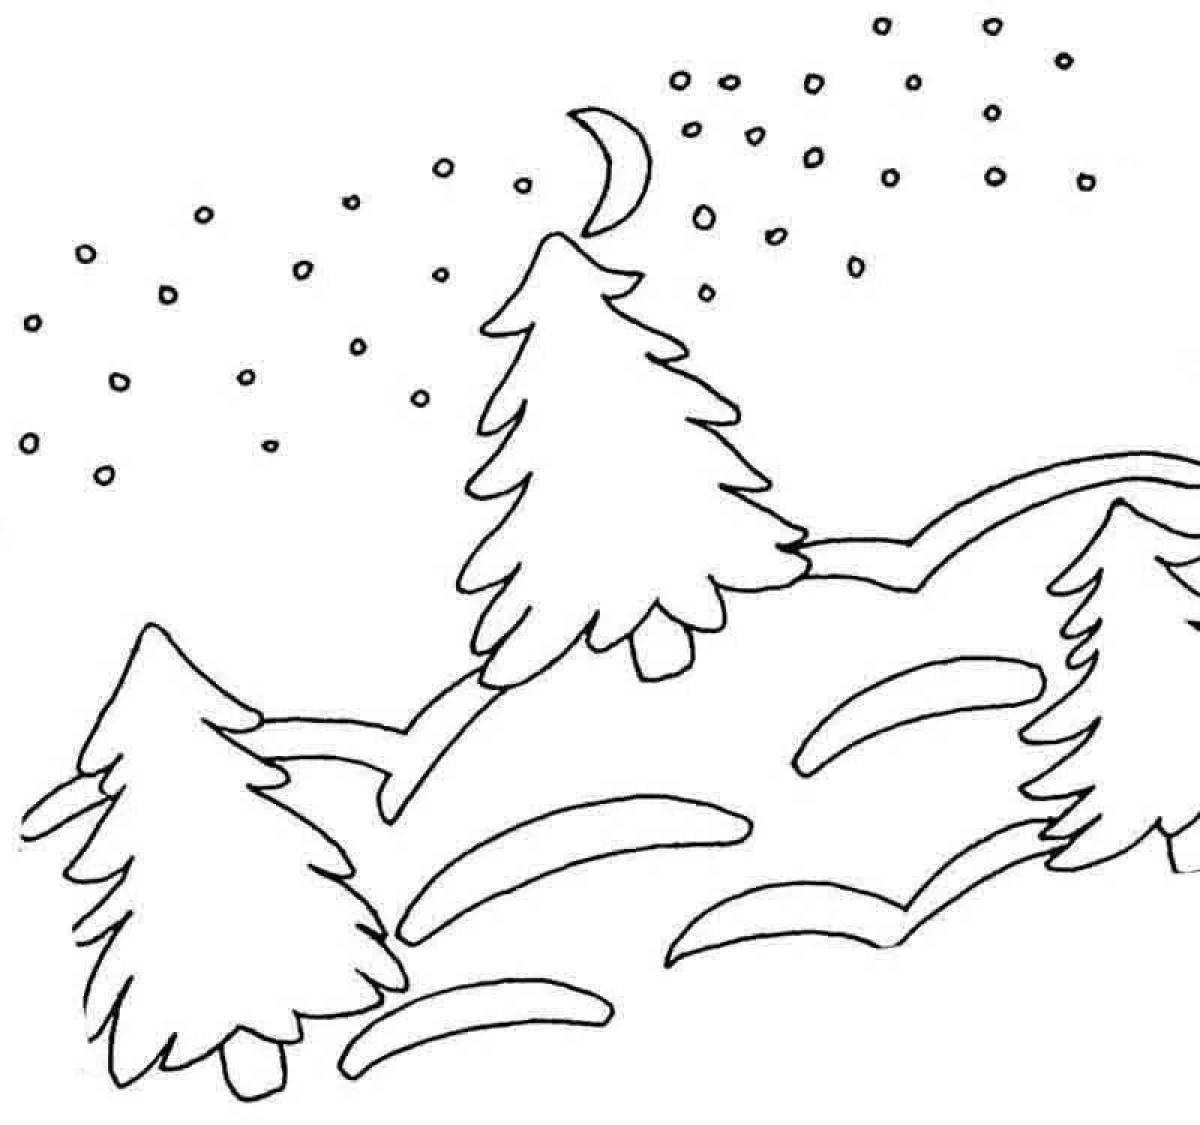 Energetic coloring winter forest for children 4-5 years old